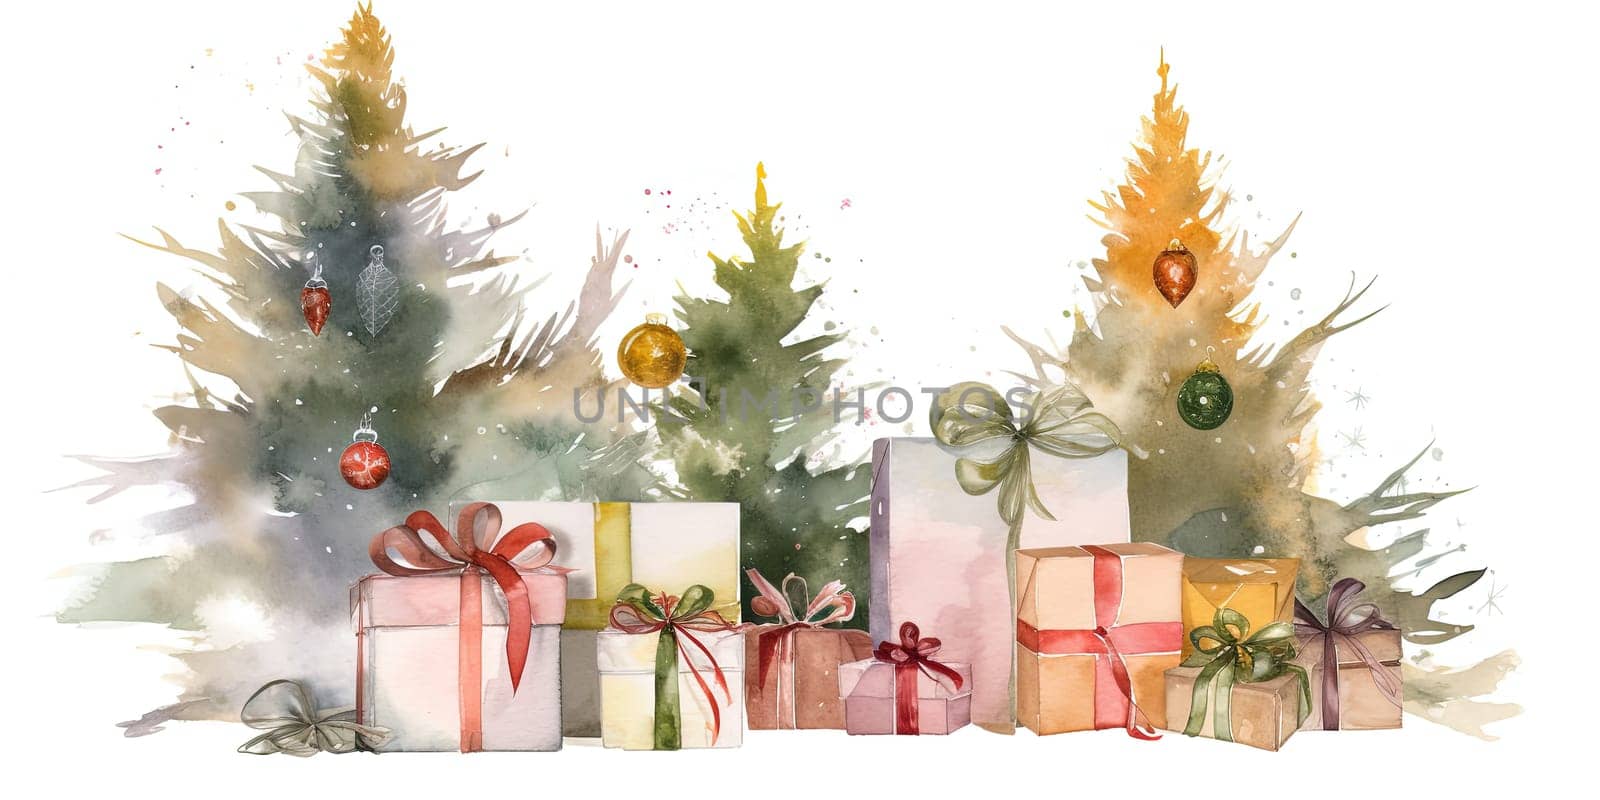 Watercolor Illustration Of Christmas Gifts Under New Year Trees by GekaSkr